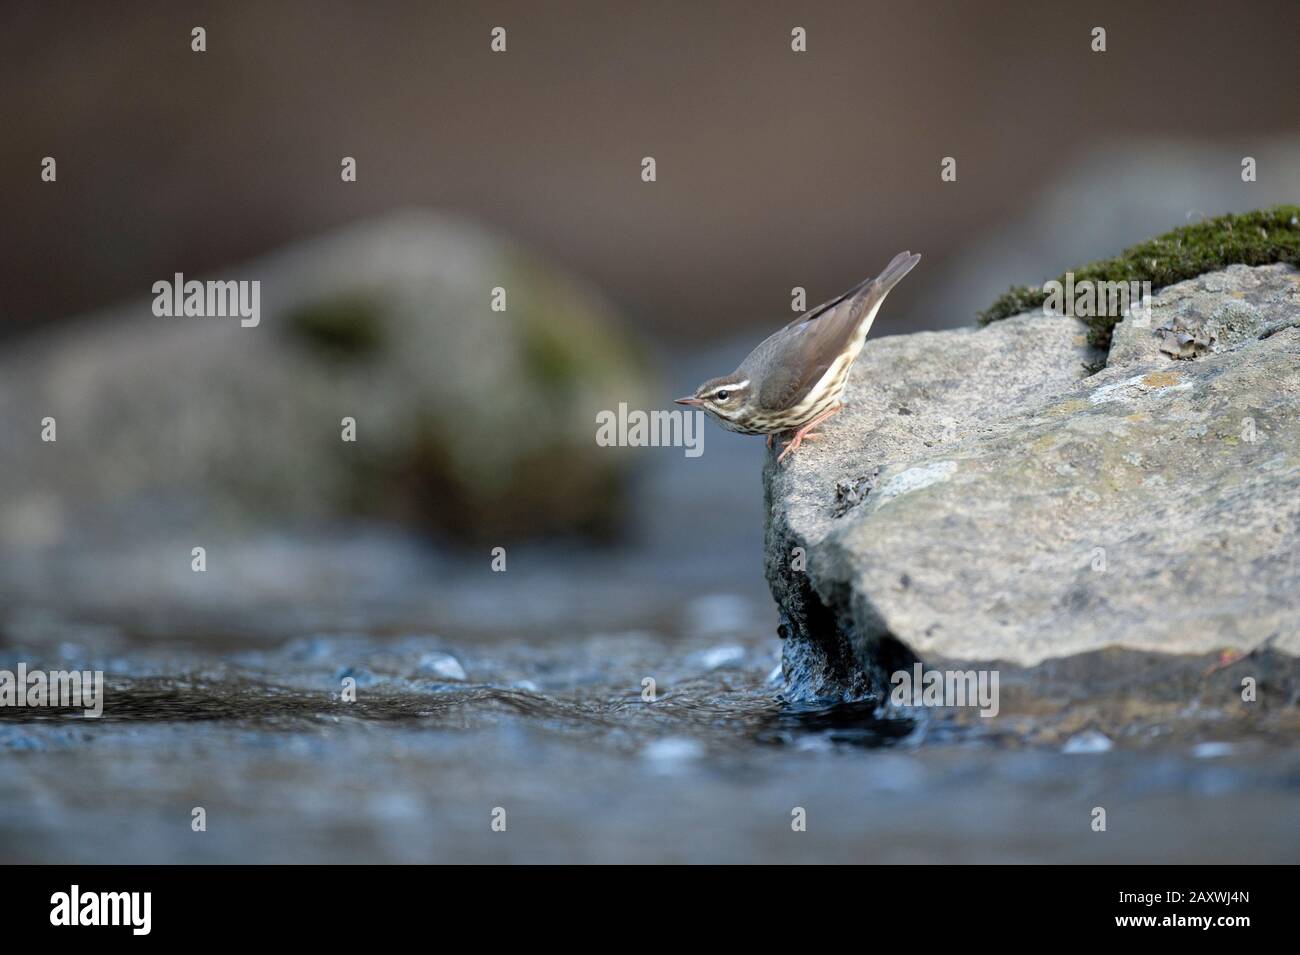 Louisiana Waterthrush perched on a large boulder in the water as it searches for small insects and invertabrates to eat in the soft overcast light. Stock Photo